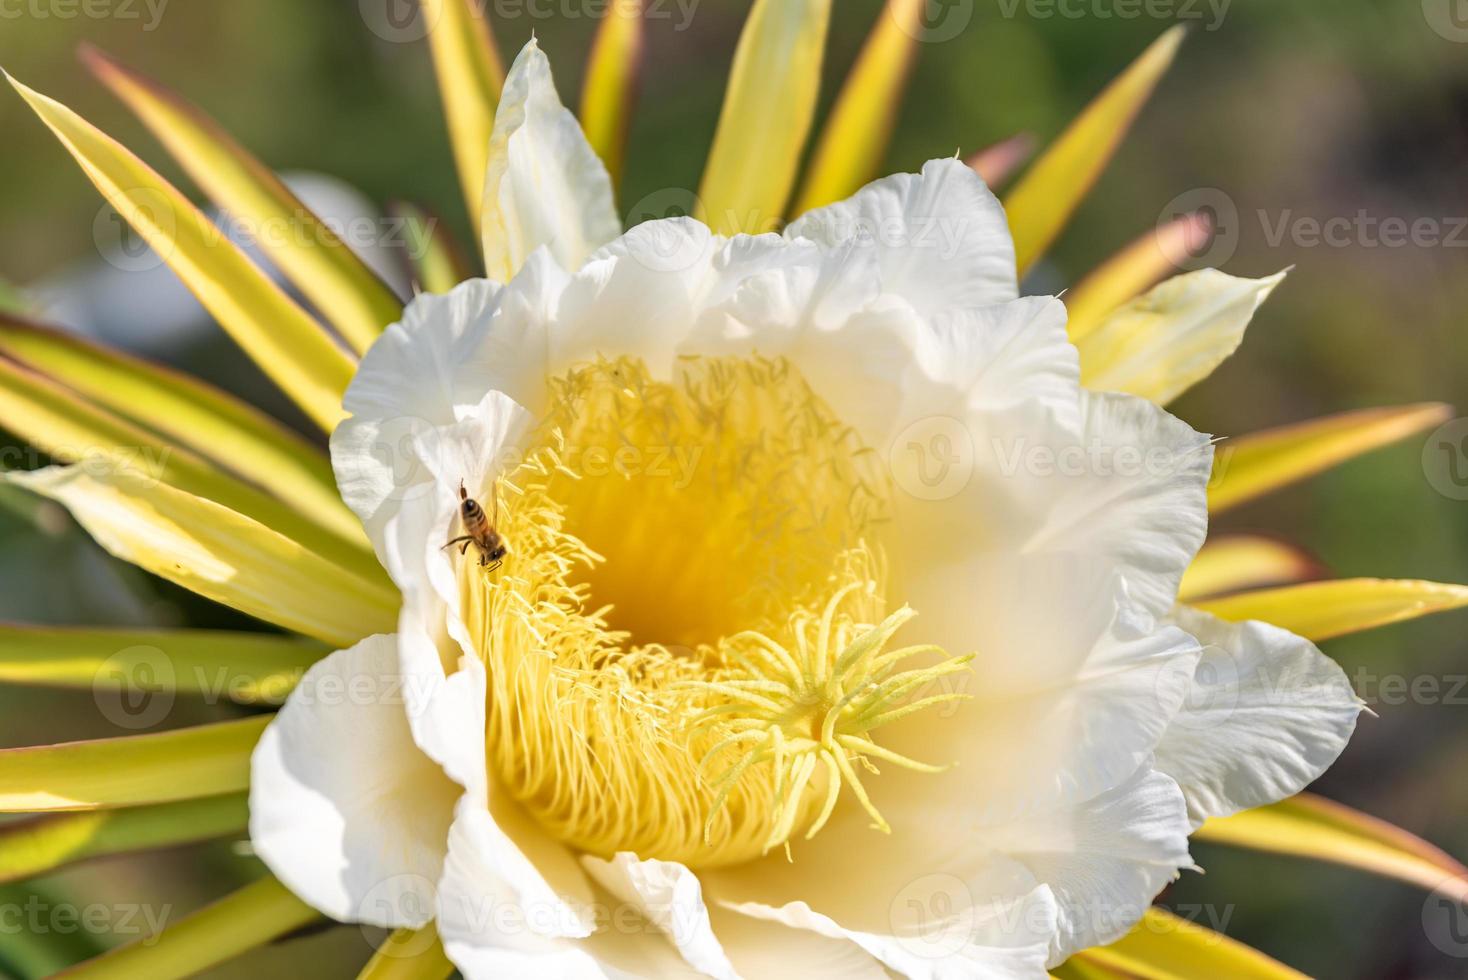 A pitaya flower with white petals and yellow stamens in full bloom photo